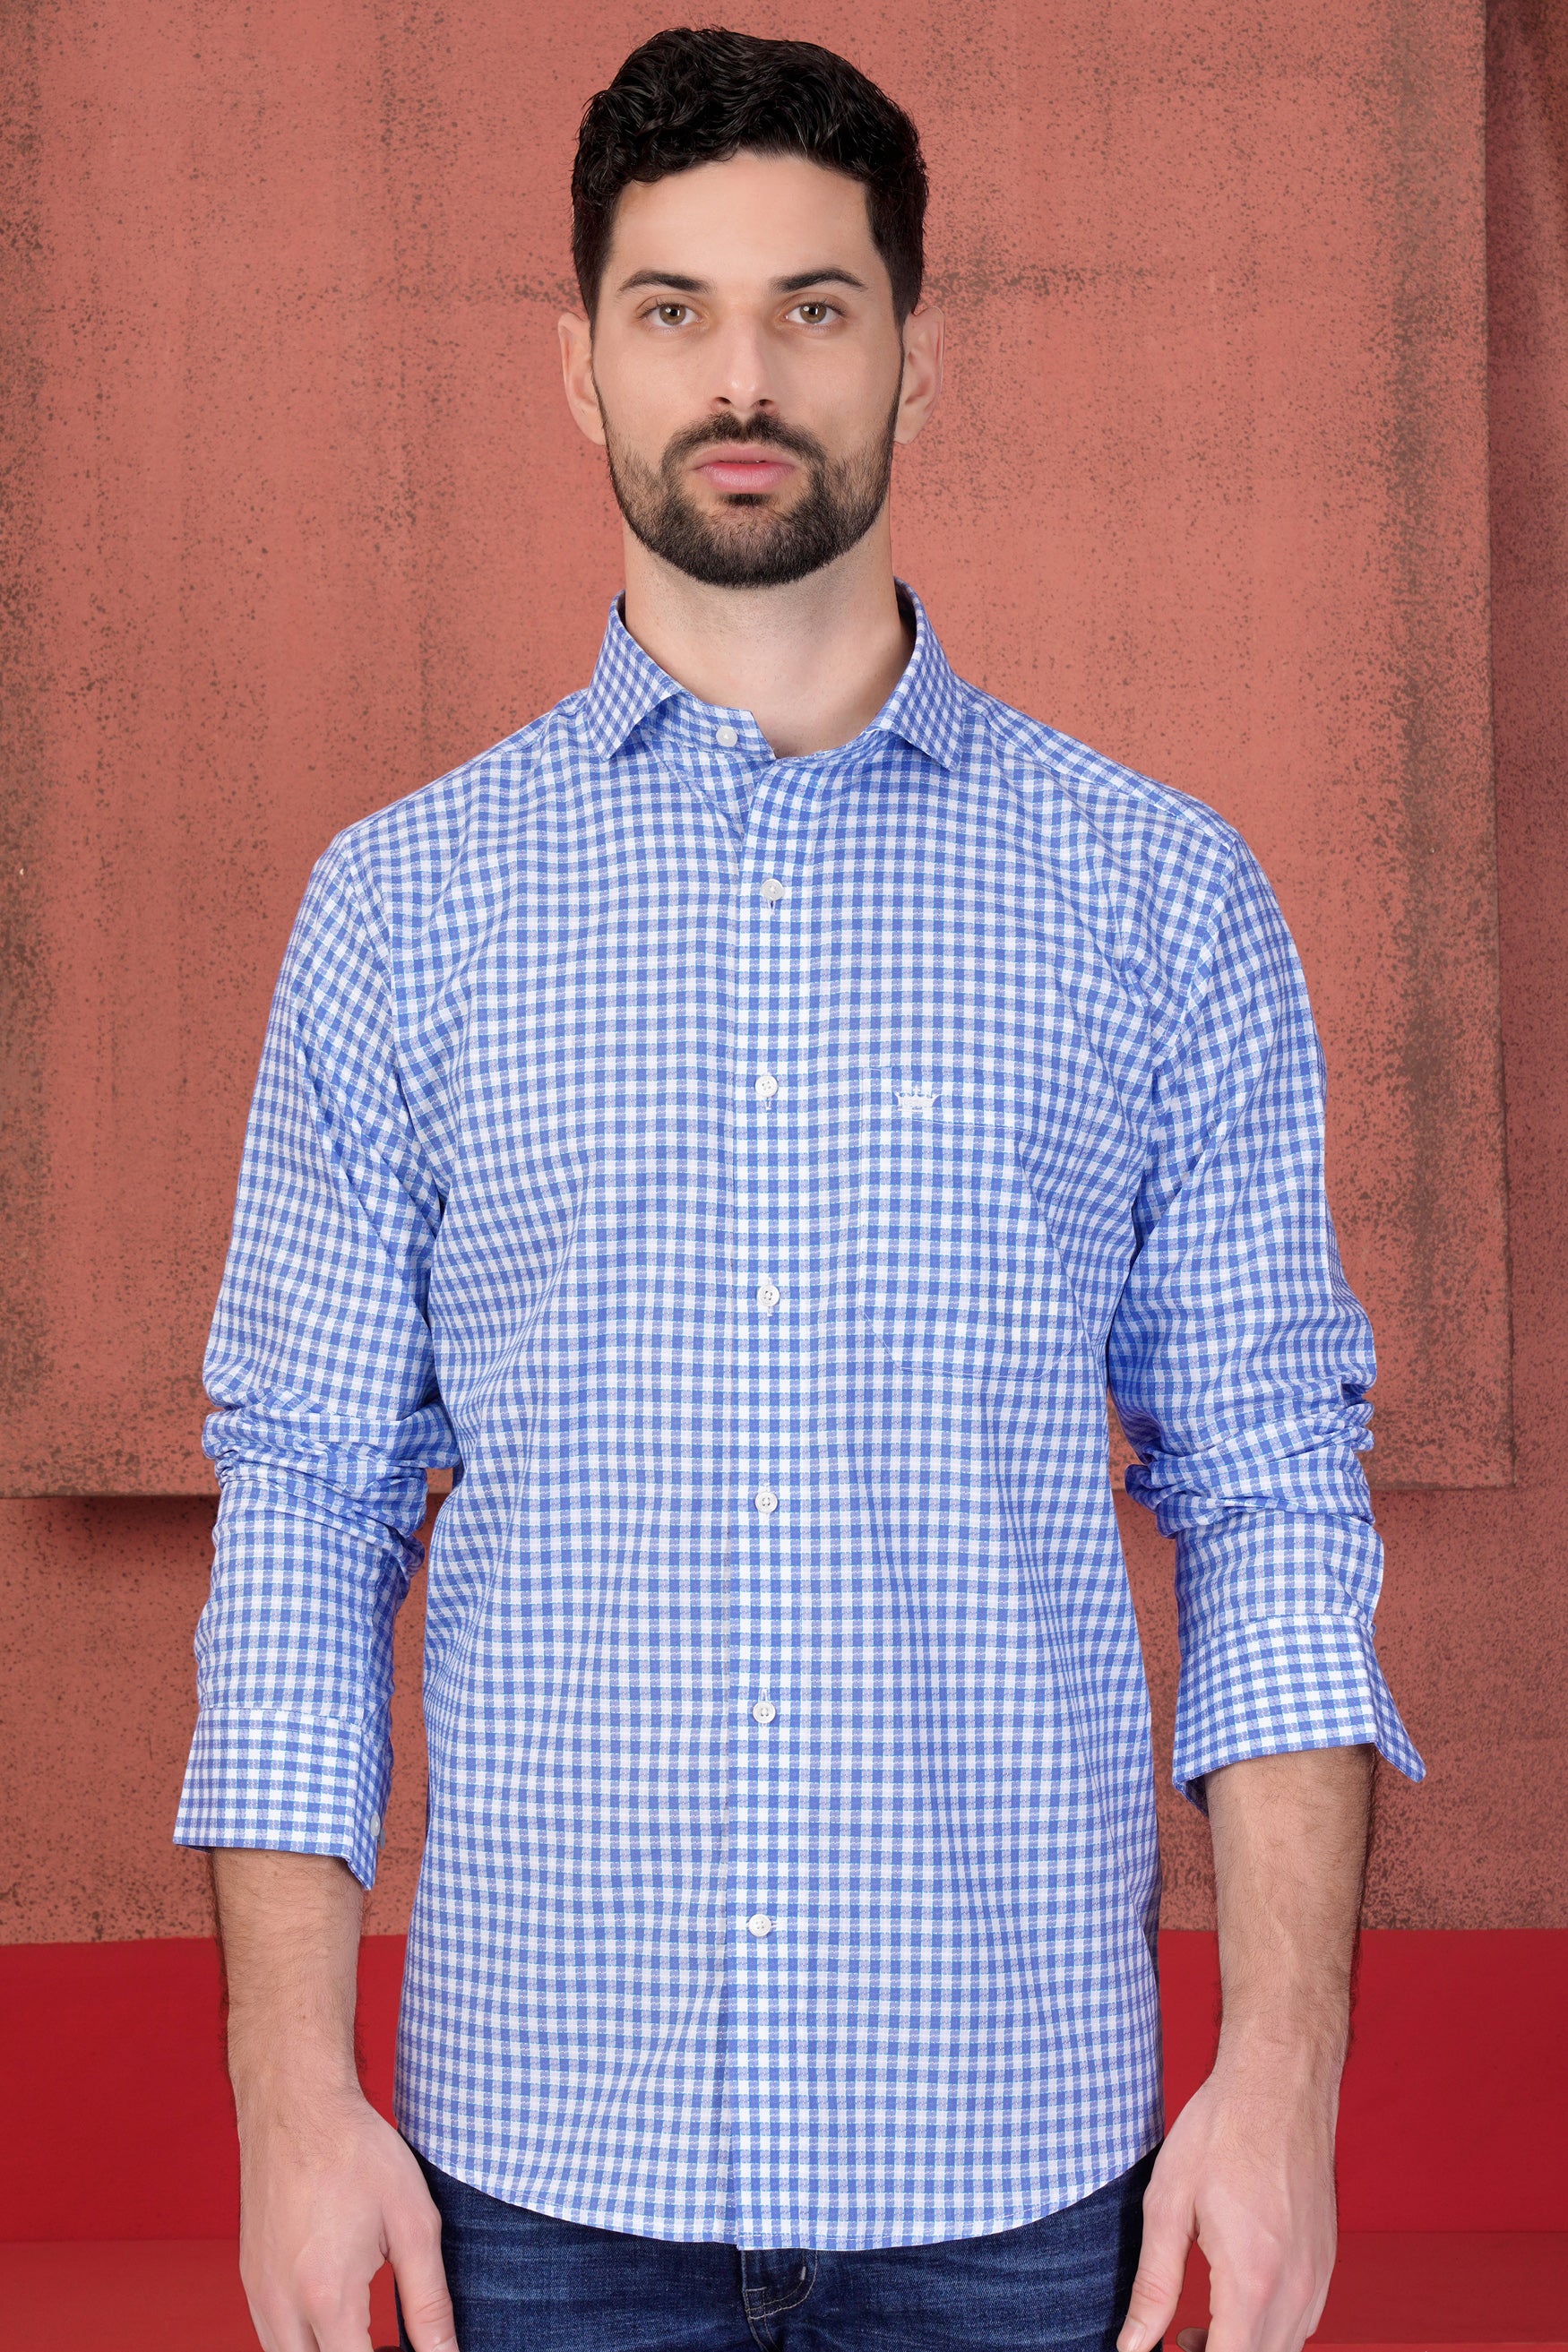 Tufts Blue and White Checkered with Bearded Man Patchwork Dobby Textured Premium Giza Cotton Designer Shirt